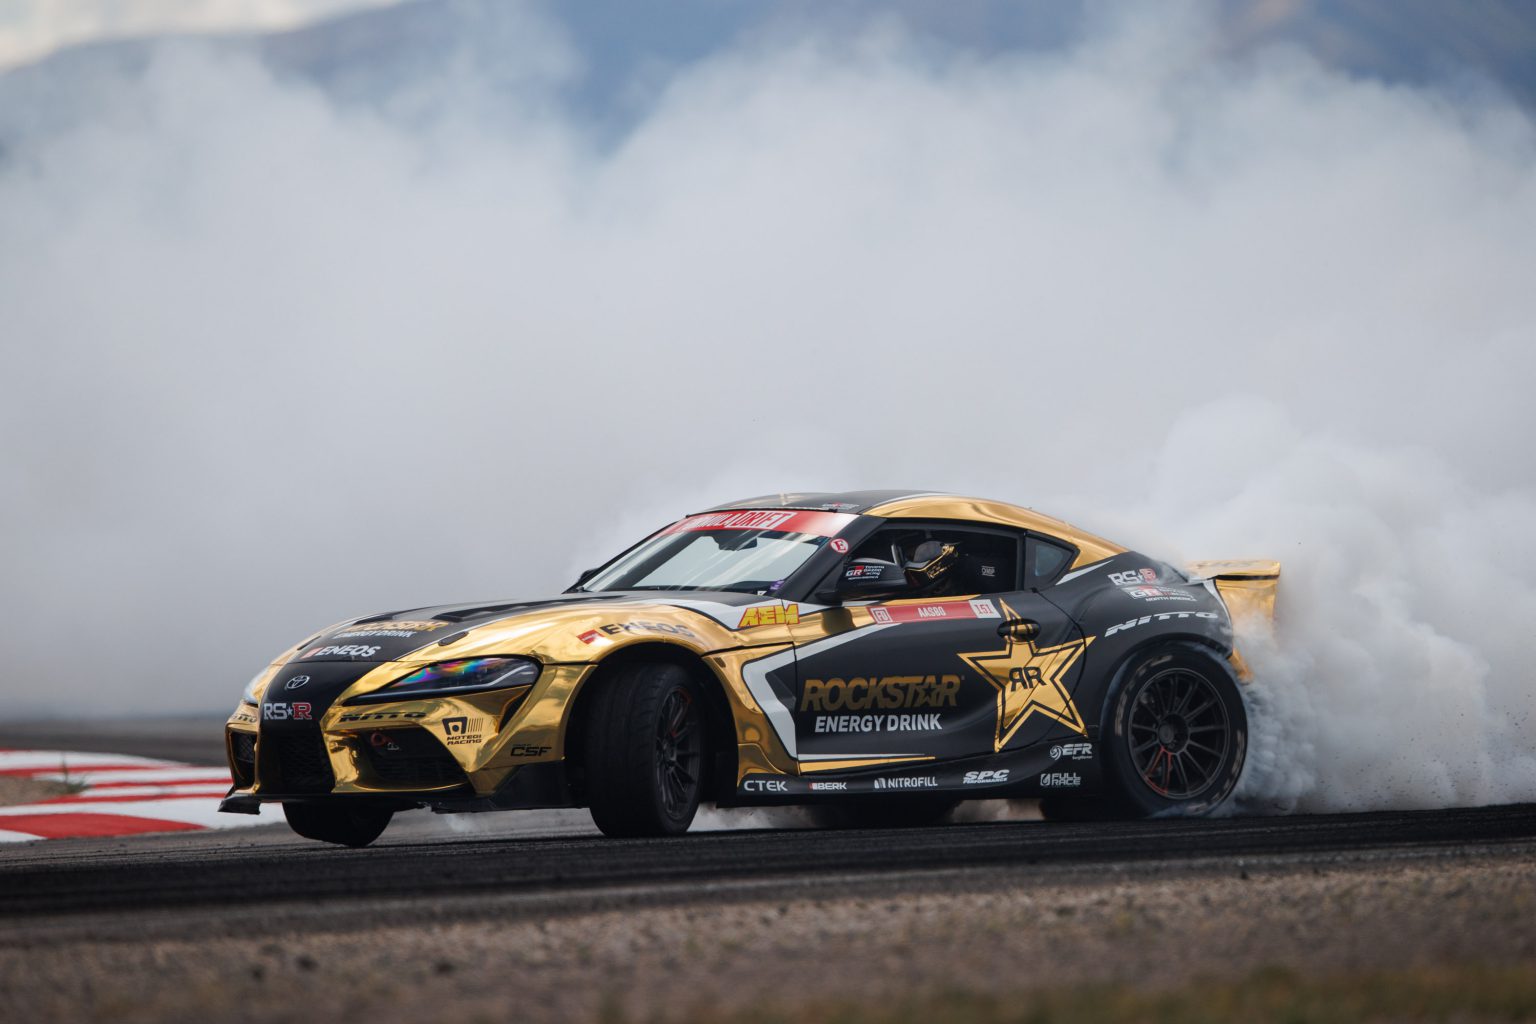 QUALIFYING RESULTS FROM ROUND 7 OF 2022 FORMULA DRIFT PRO AND ROUND 4